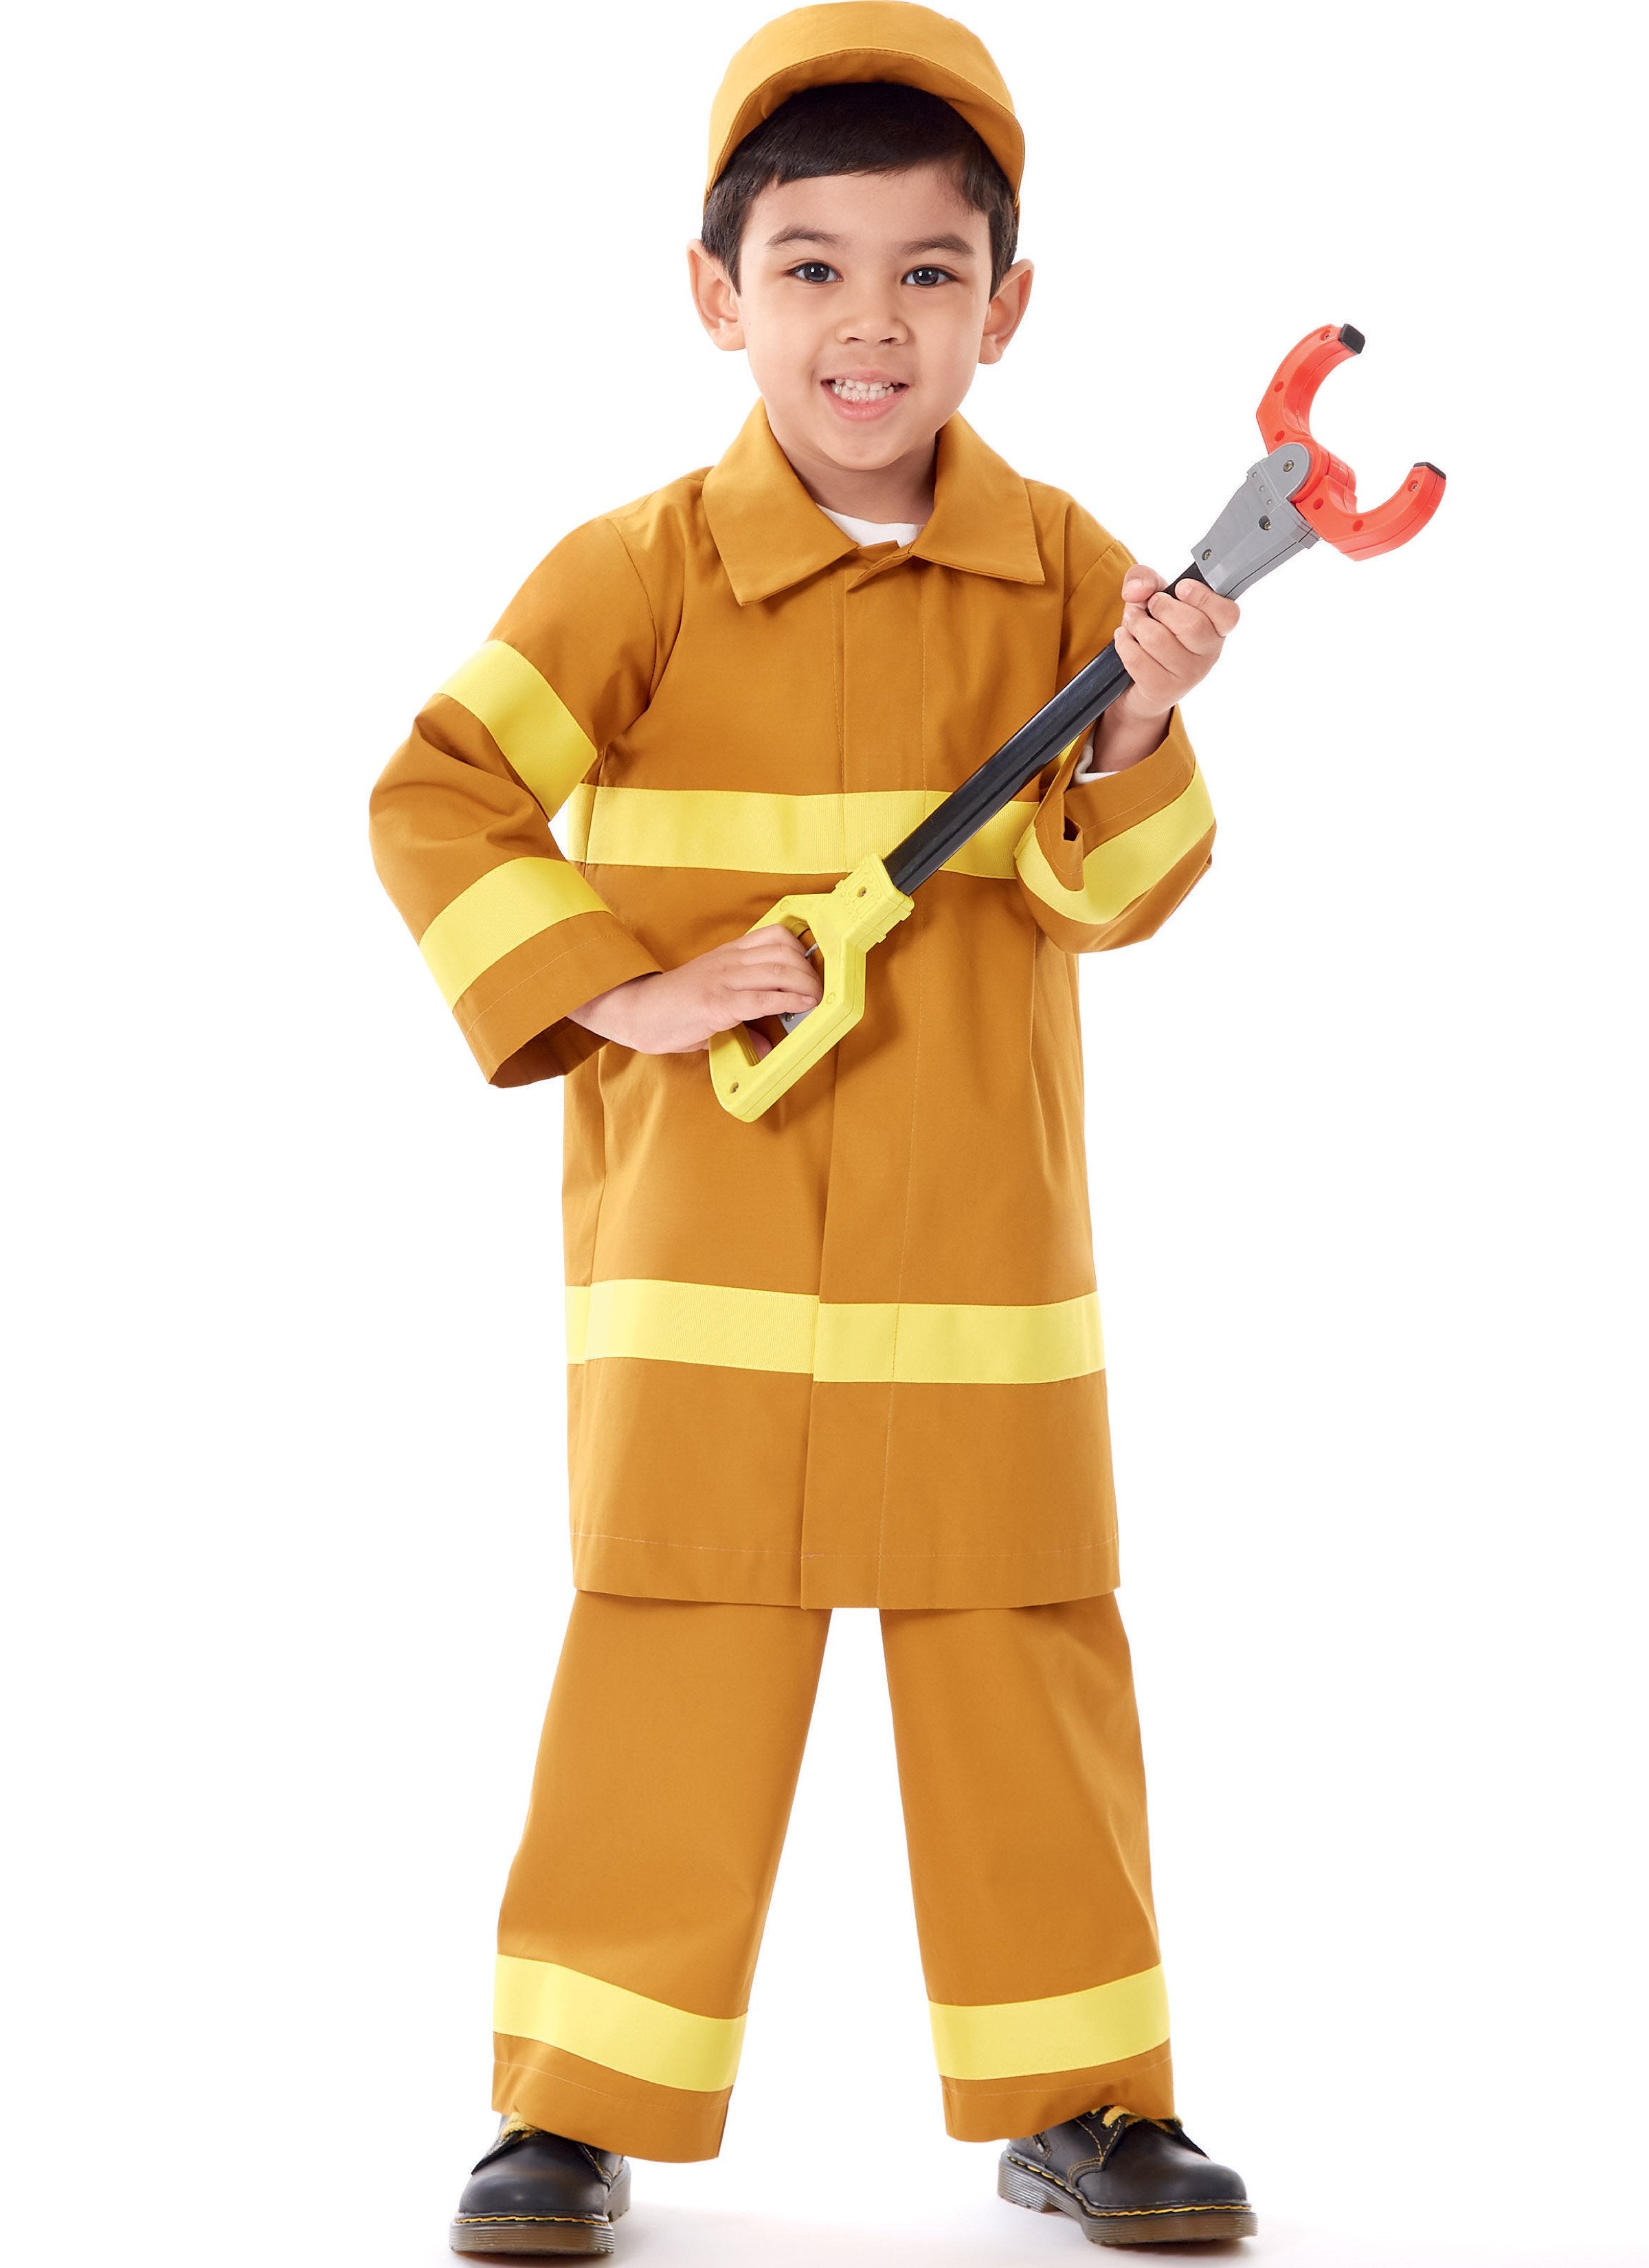 McCall's sewing pattern 8226 Children's First Responder Costume from Jaycotts Sewing Supplies